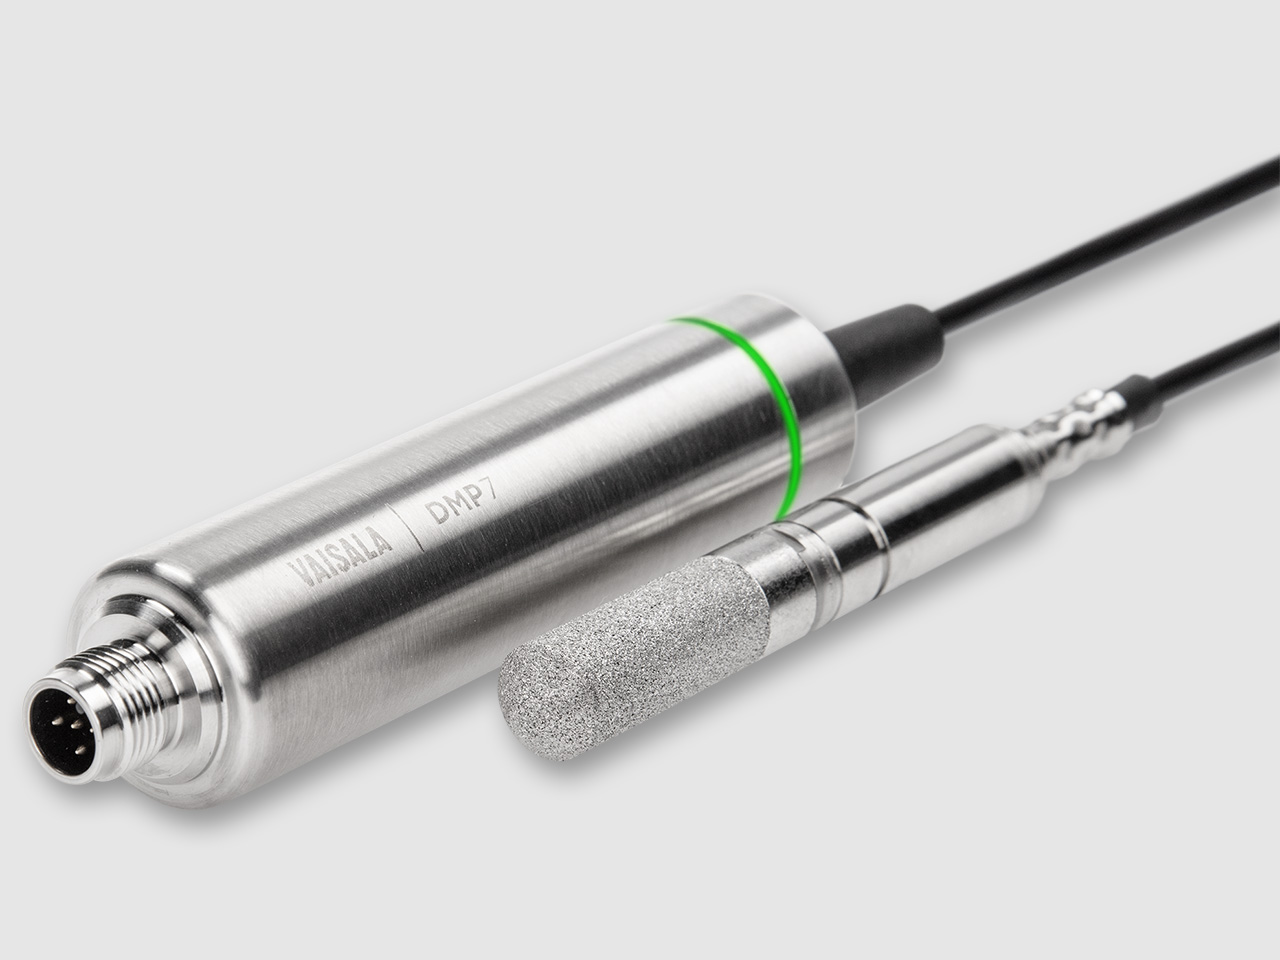 Vaisala DRYCAP® Dew Point and Temperature Probe DMP7 is made for tight spaces and low-humidity applications. 